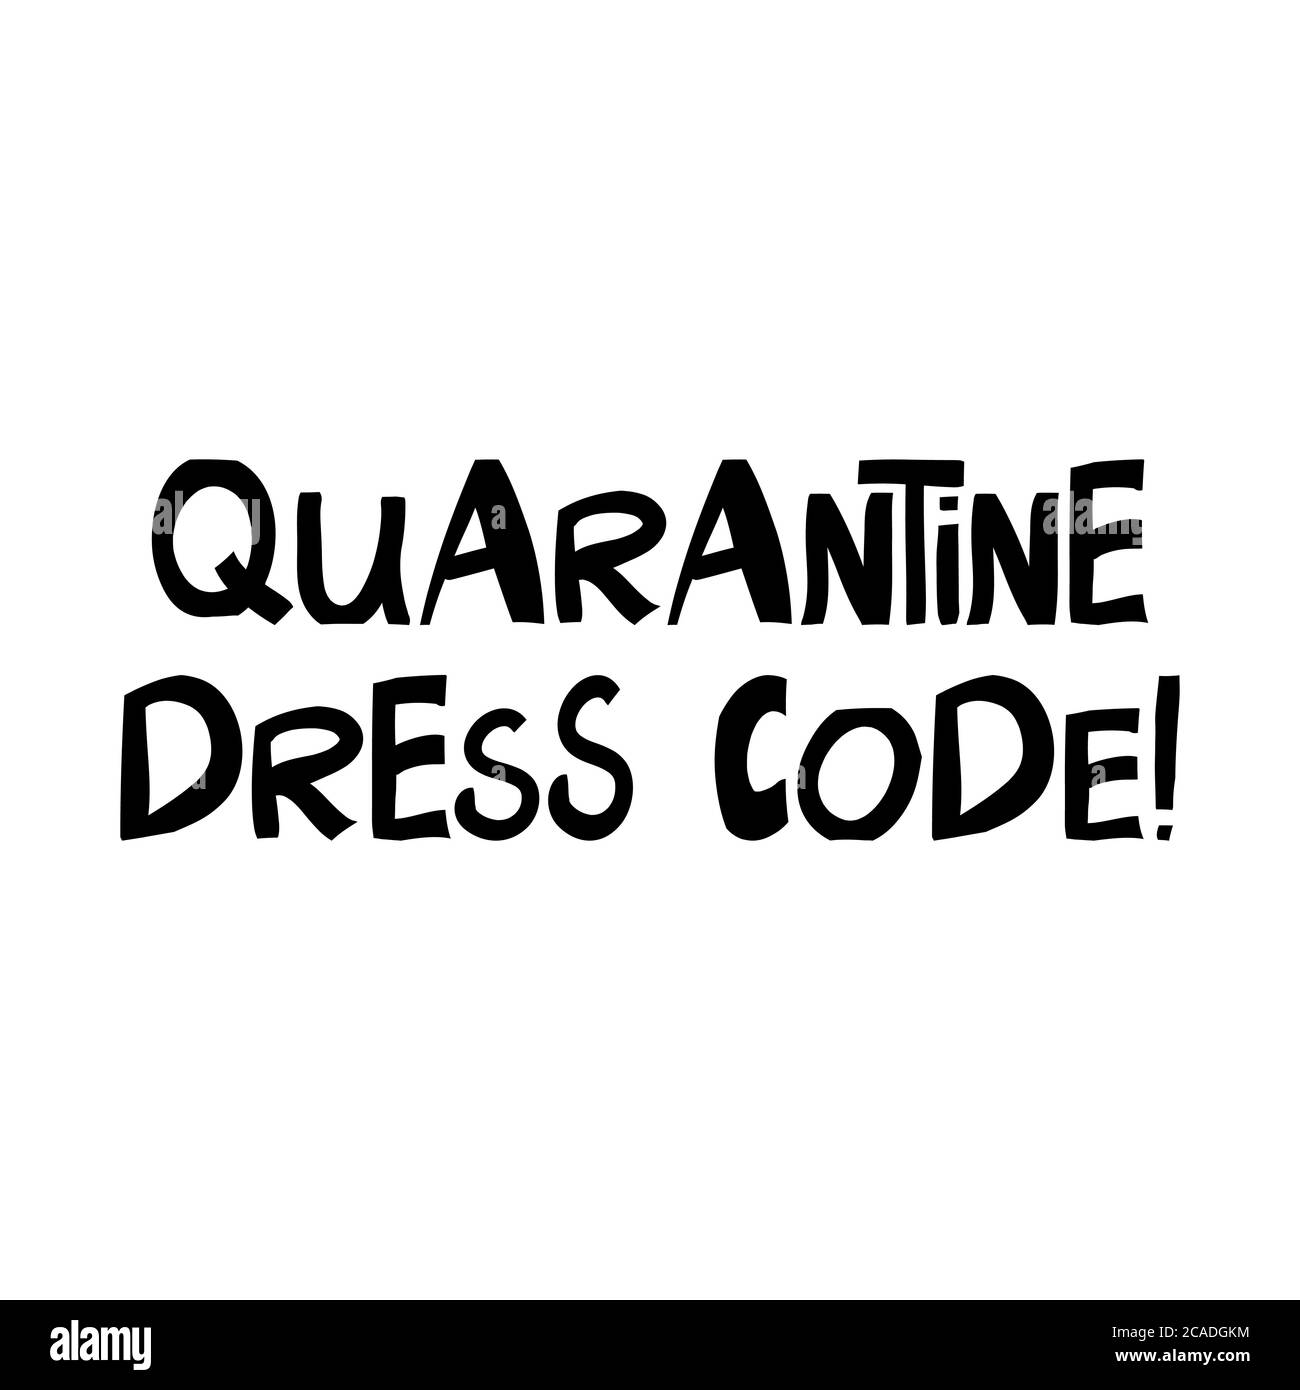 Quarantine dress code. Cute hand drawn lettering in modern scandinavian style. Isolated on white background. Vector stock illustration. Stock Vector